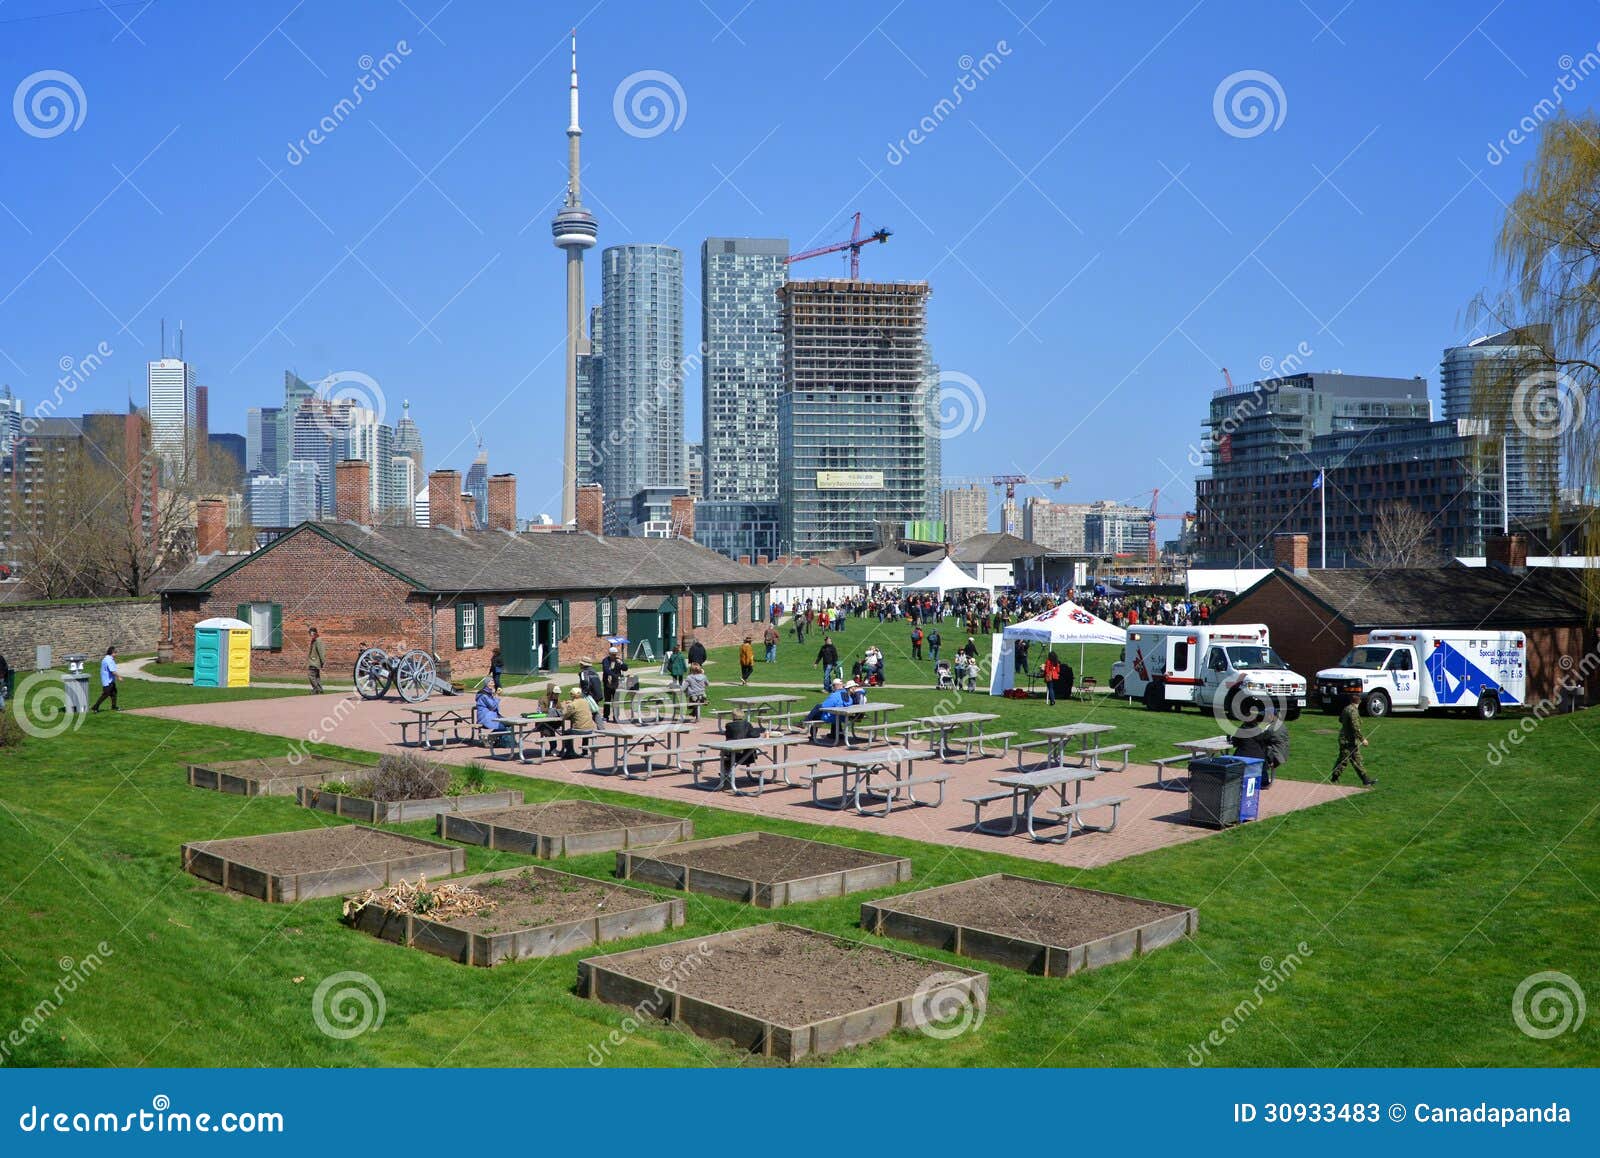 Fort York National Historic Site Images